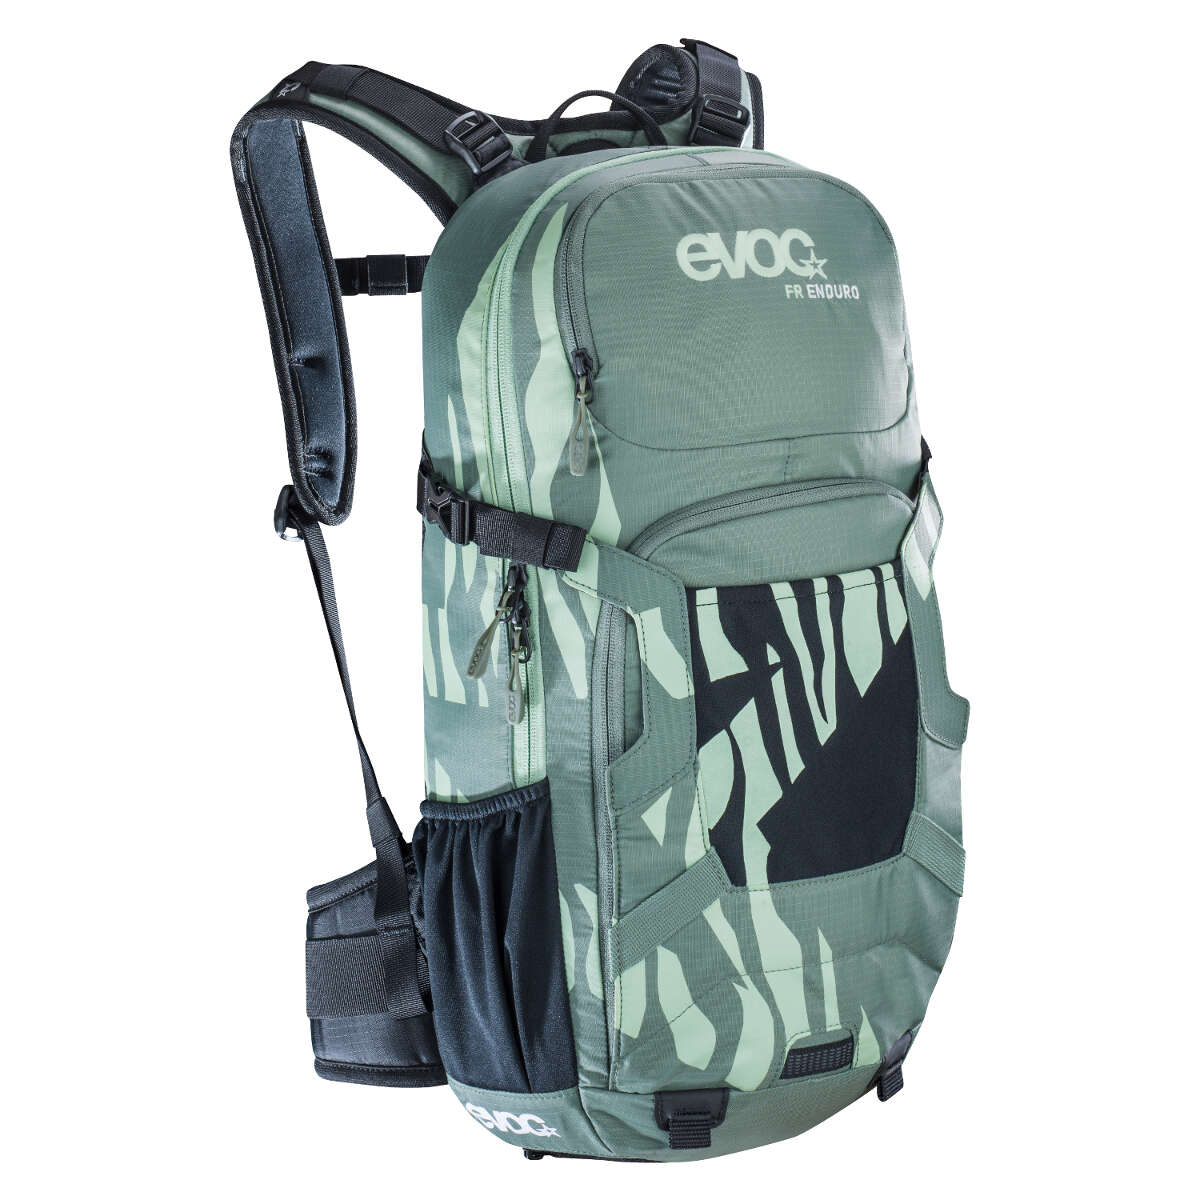 Evoc Girls Protector Backpack with Hydration System Compartment FR Enduro Olive-Light Petrol, 16 Liter